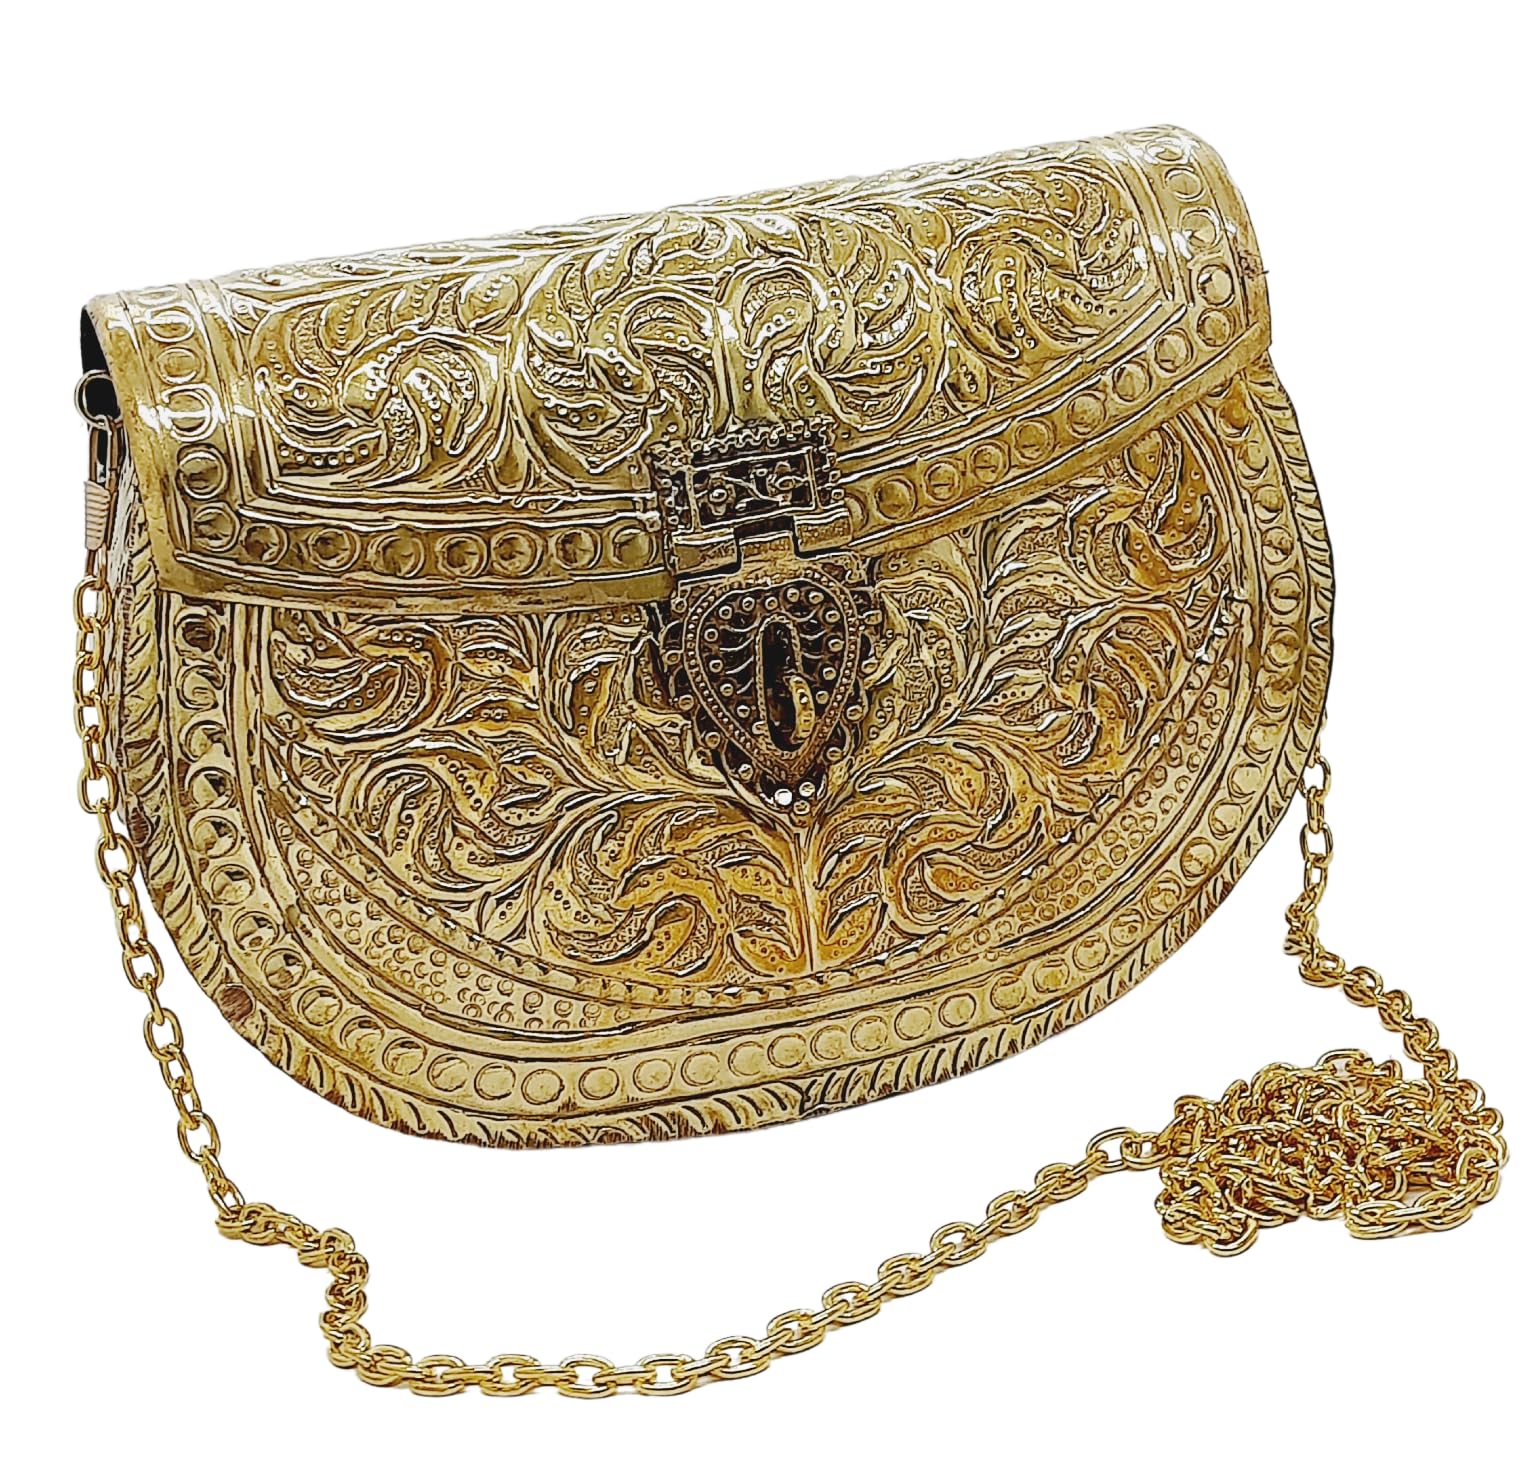 Buy Girls/women Party Gift Bridal Golden Metal Bag, Brass Clutch, Vintage  Antique Ethnic Clutch, Metal Purse End to End Tracking Available Online in  India - Etsy